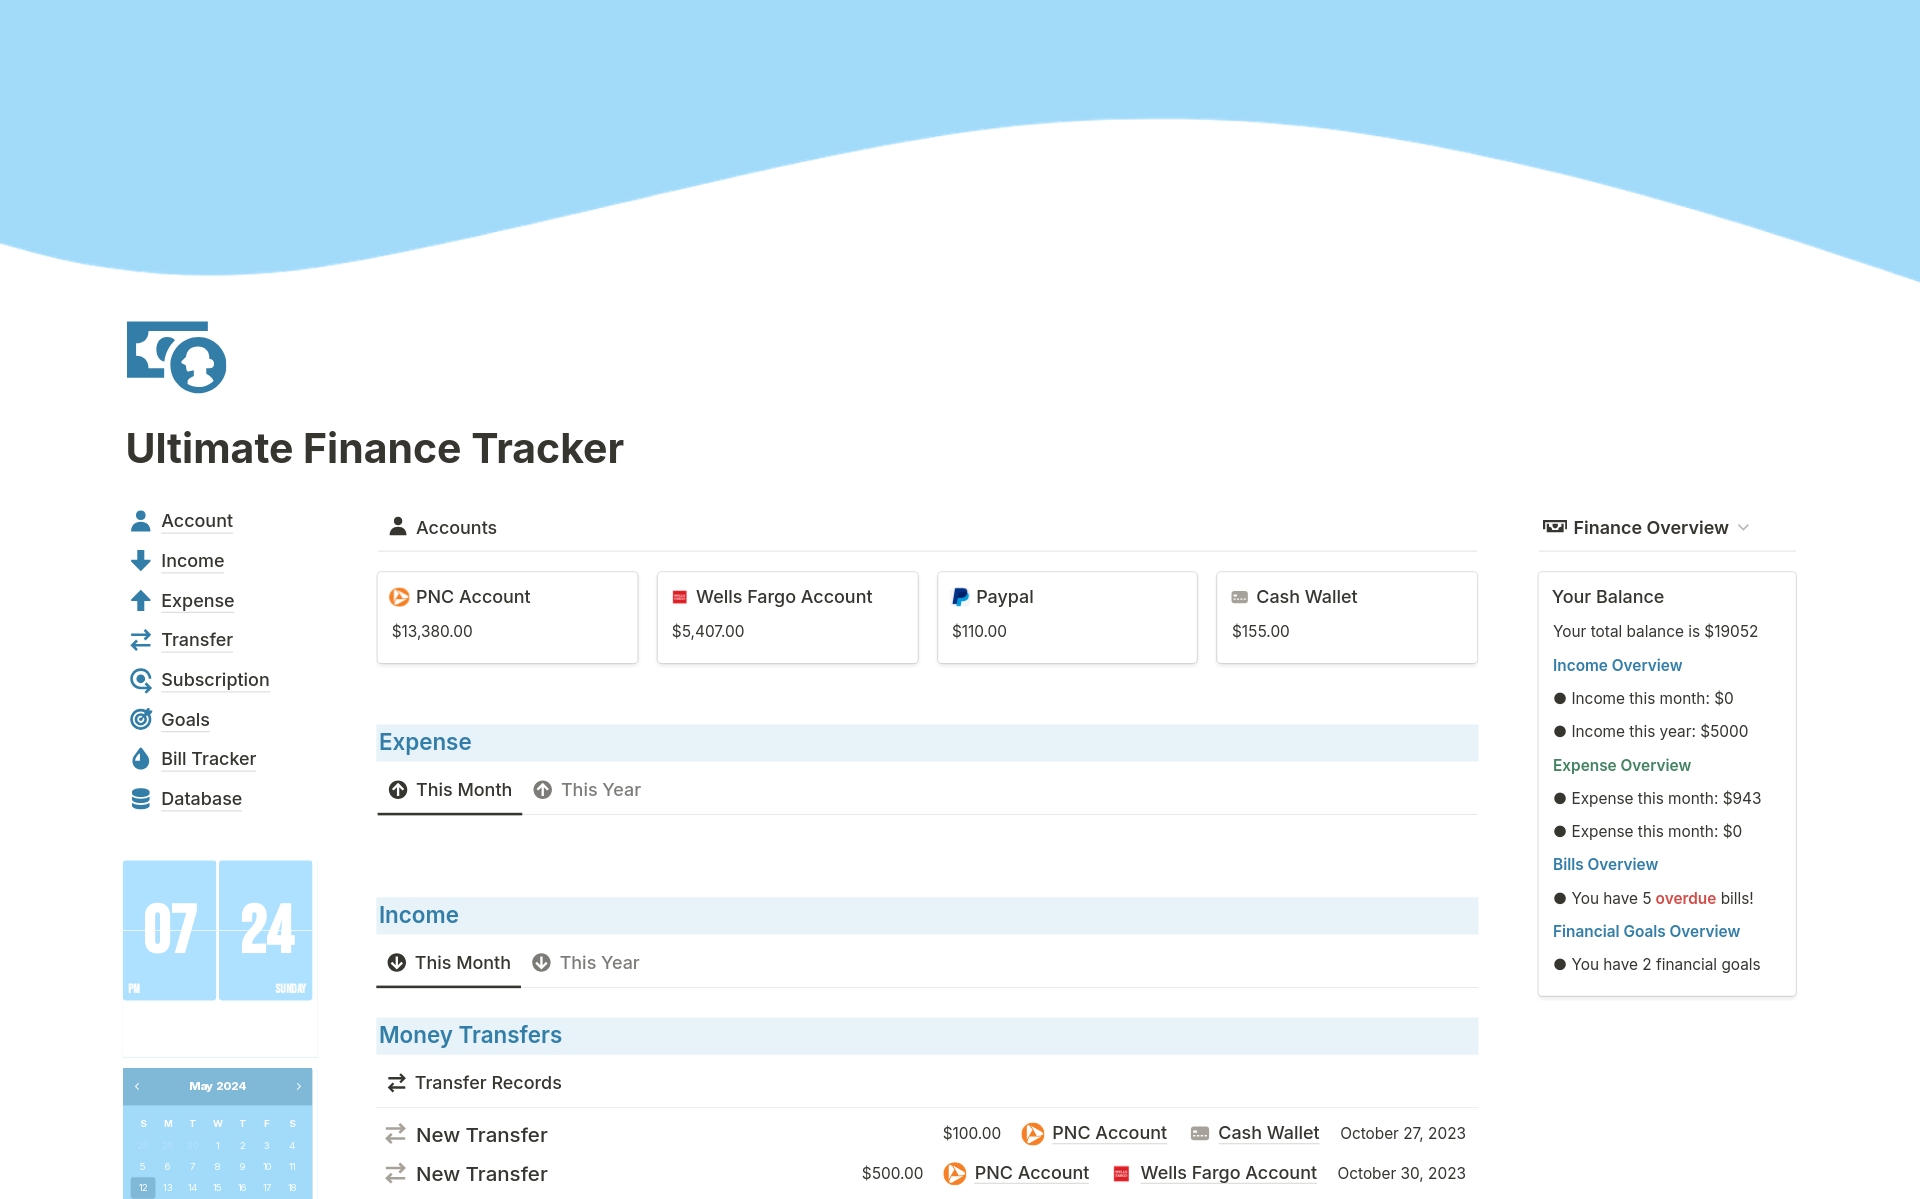 Your all-in-one finance planner solution.
